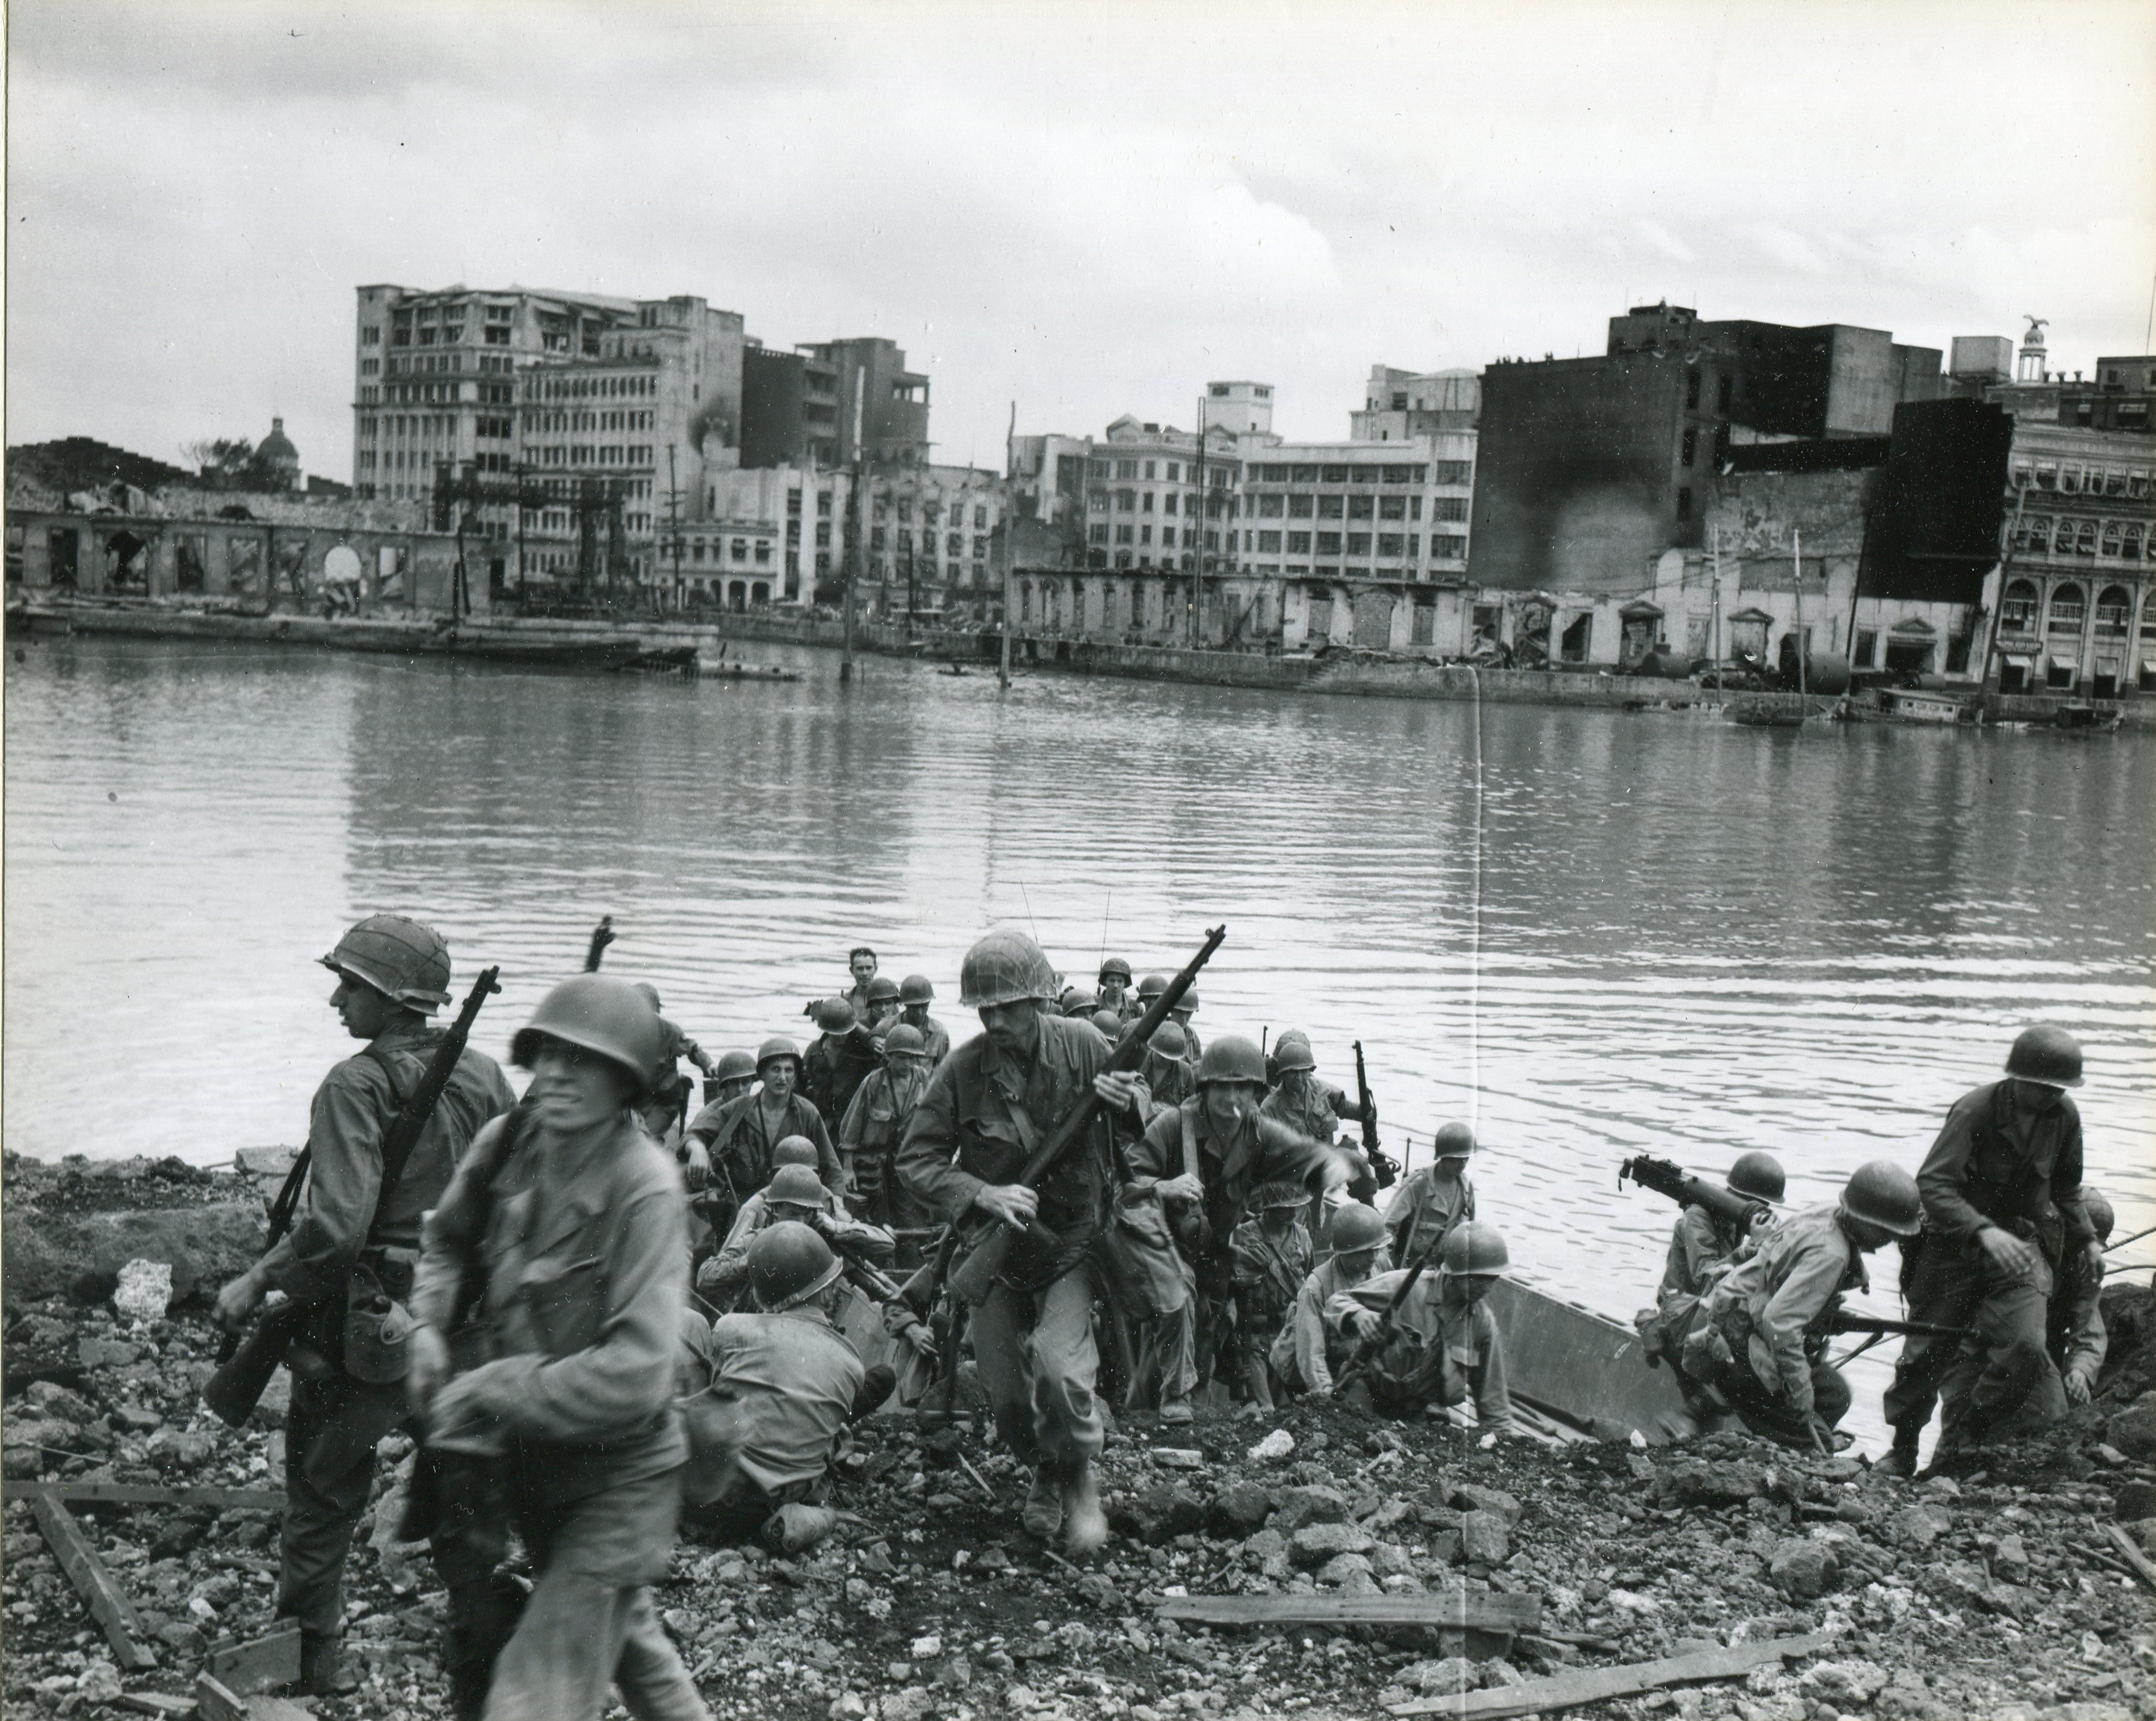 American troops storm the south bank of the Pasig River during the American assault on the Walled City on February 23, 1945 during the Battle of Manila